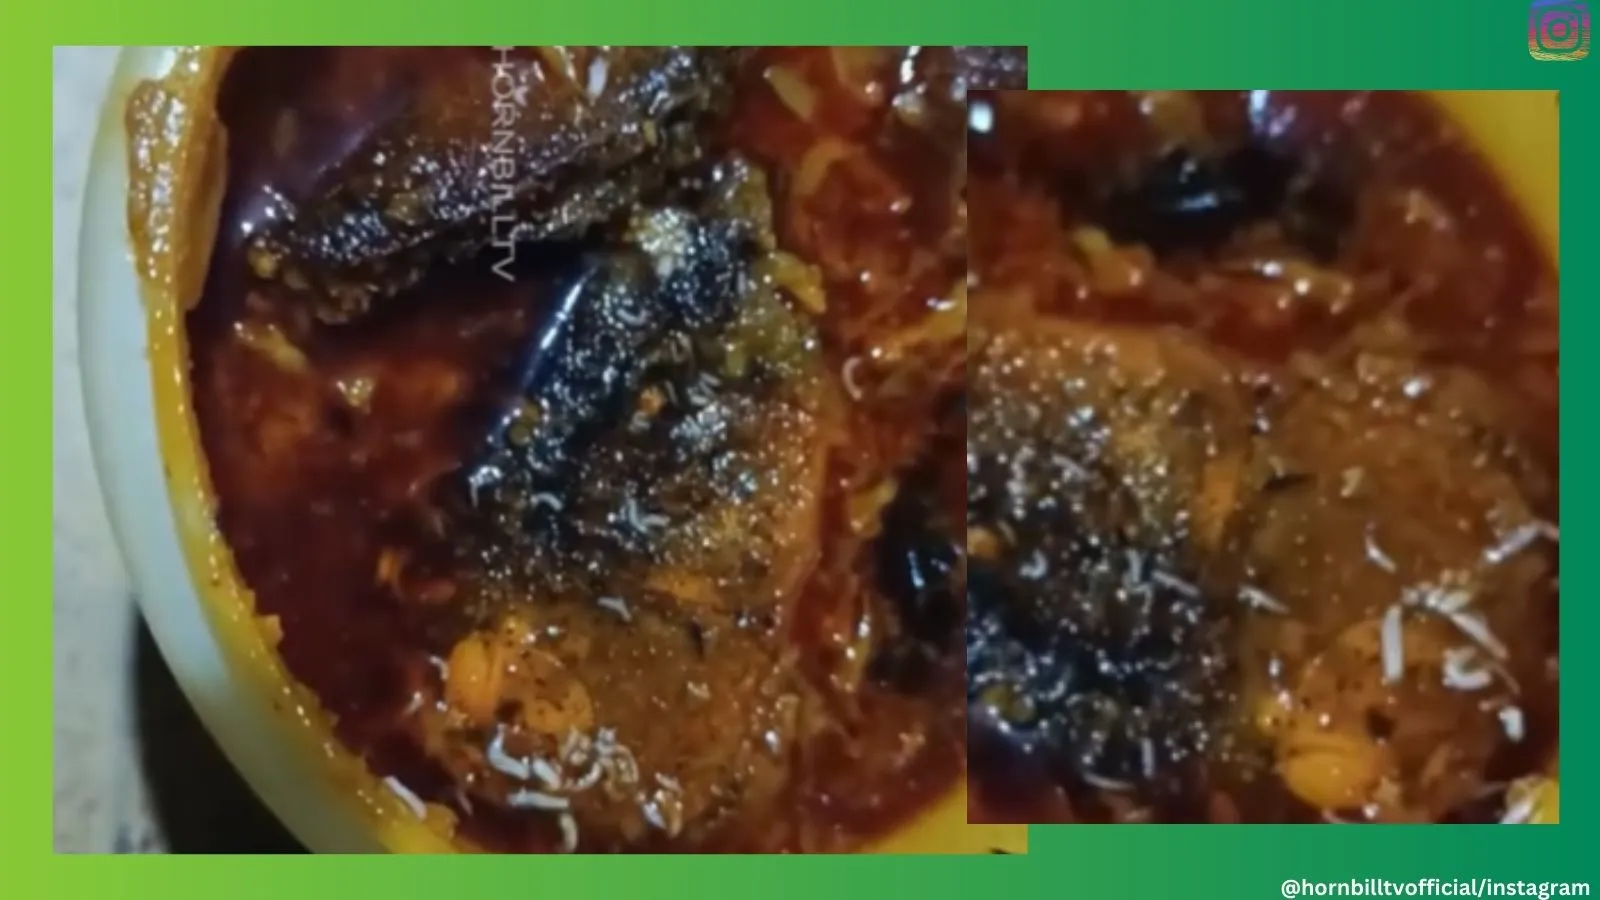 Watch: Customer finds live maggots in fish curry from Nagaland